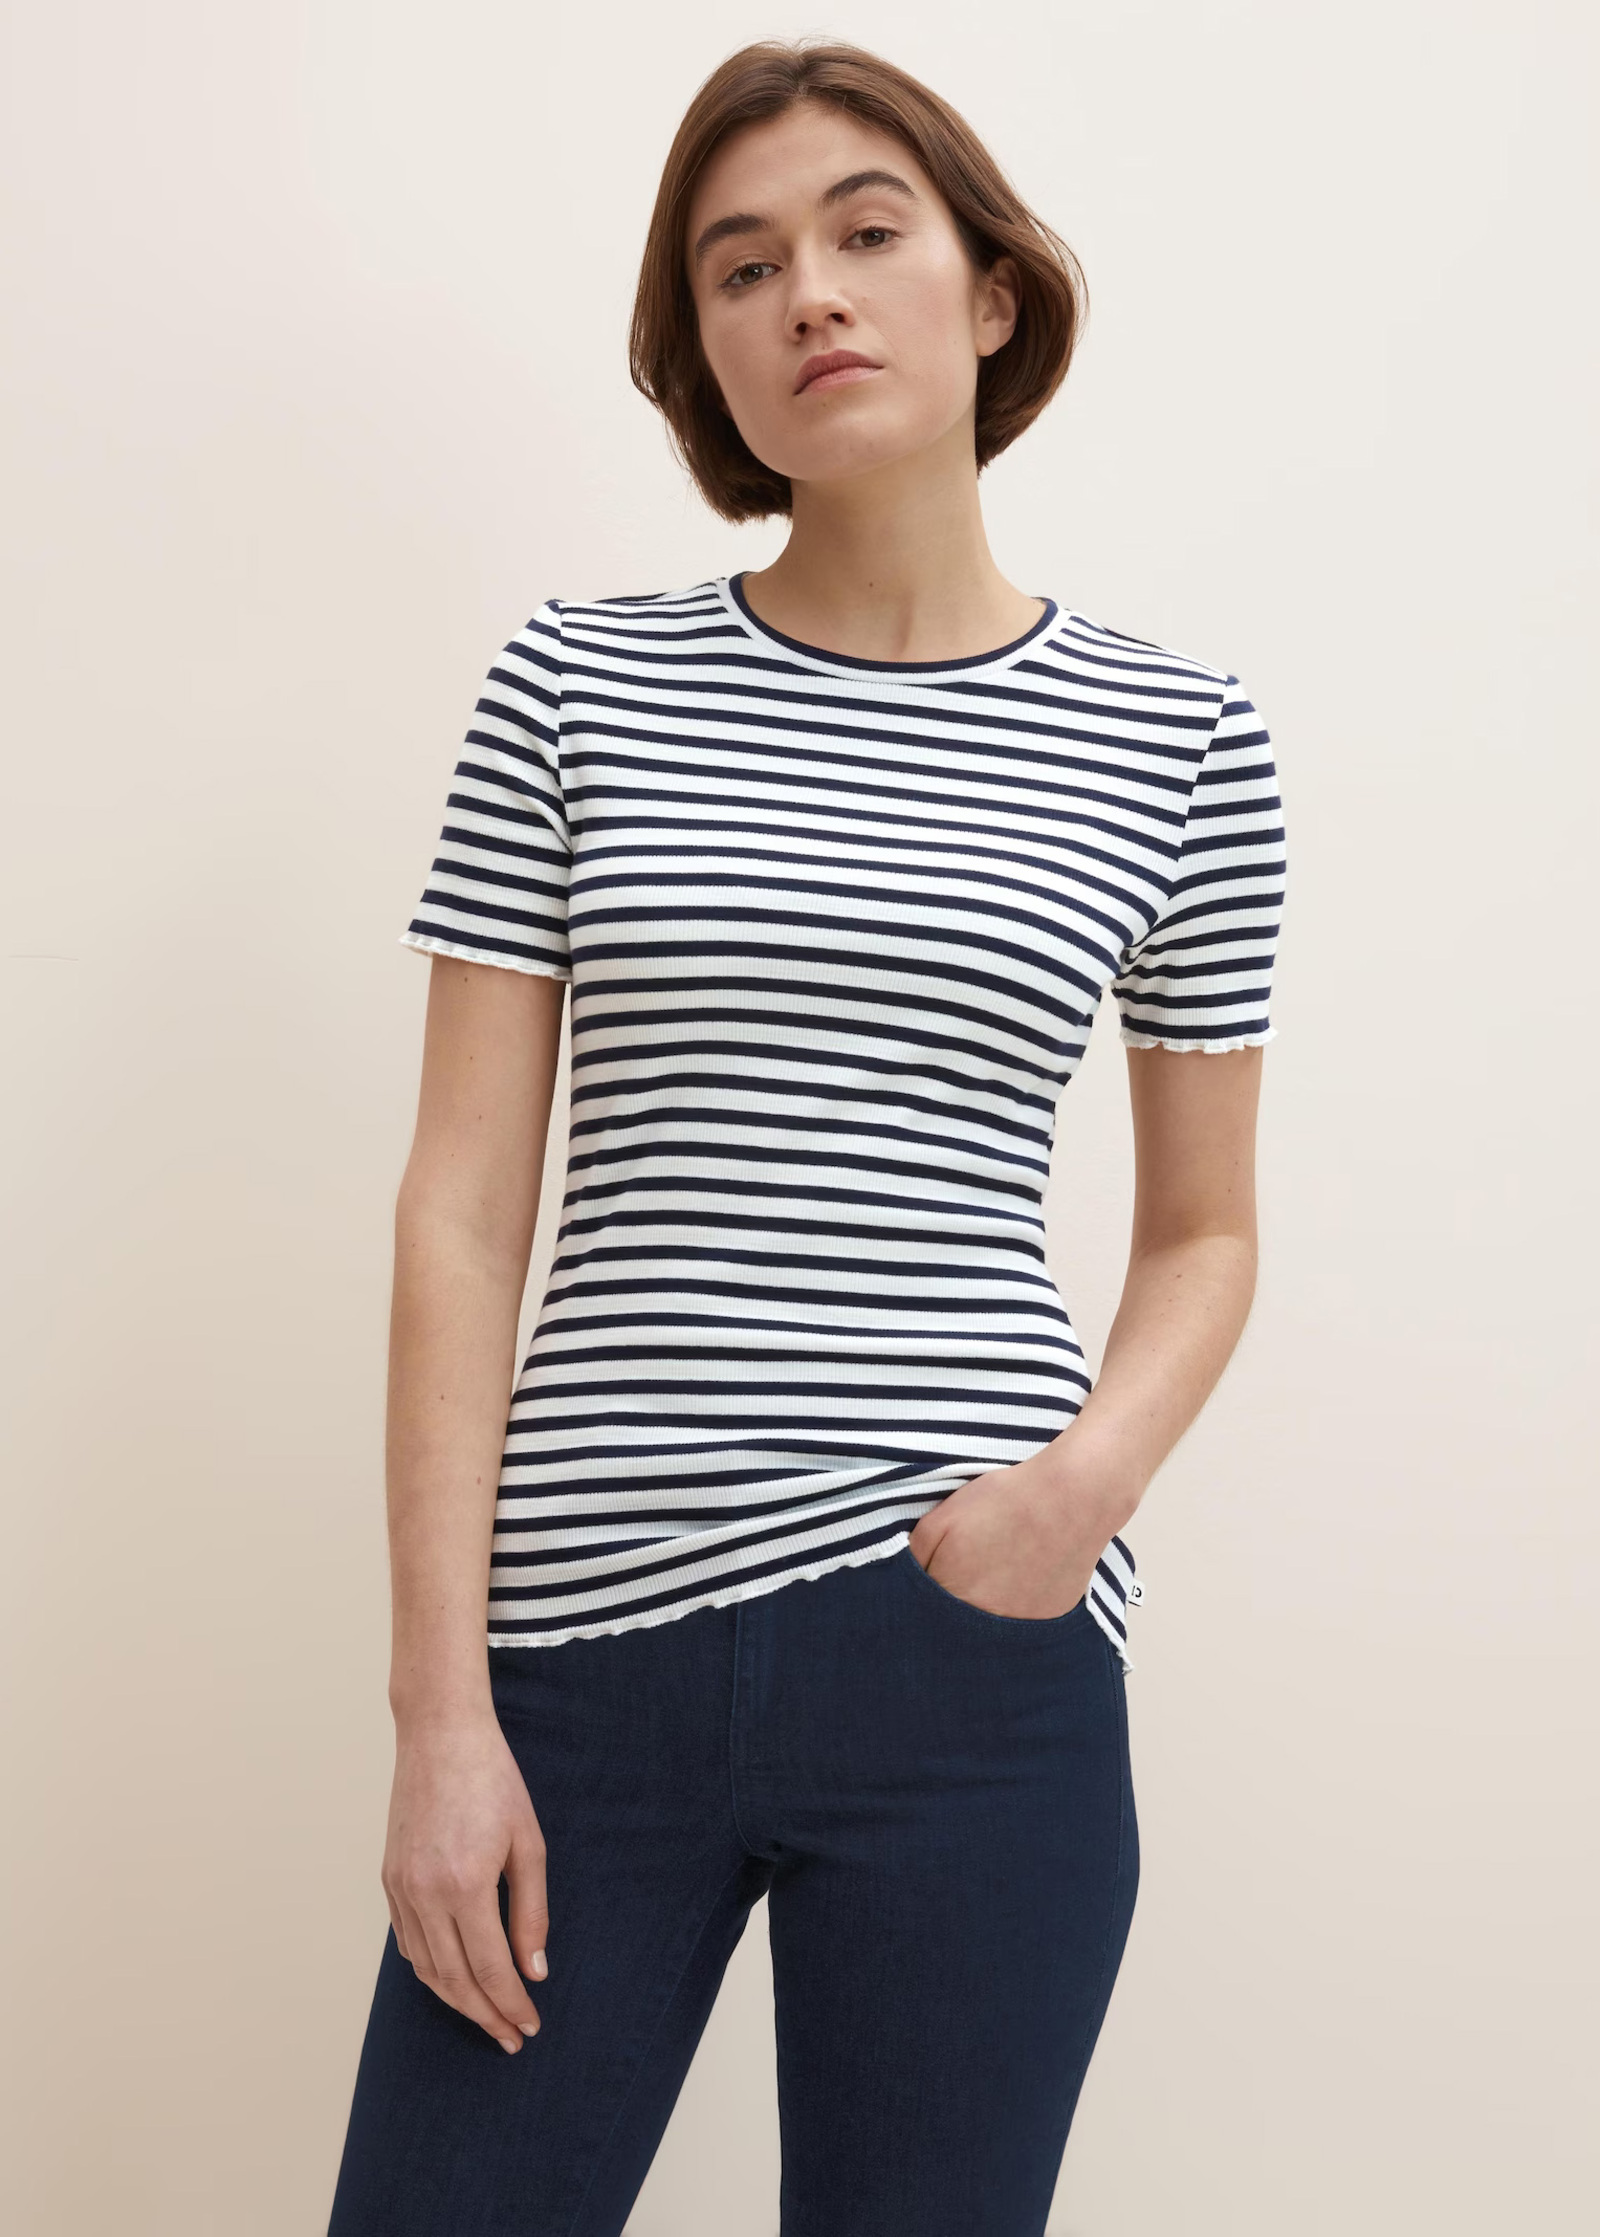 with Stripe - t-shirt White Stripes Navy Slim fit Tom M Size Tailor®